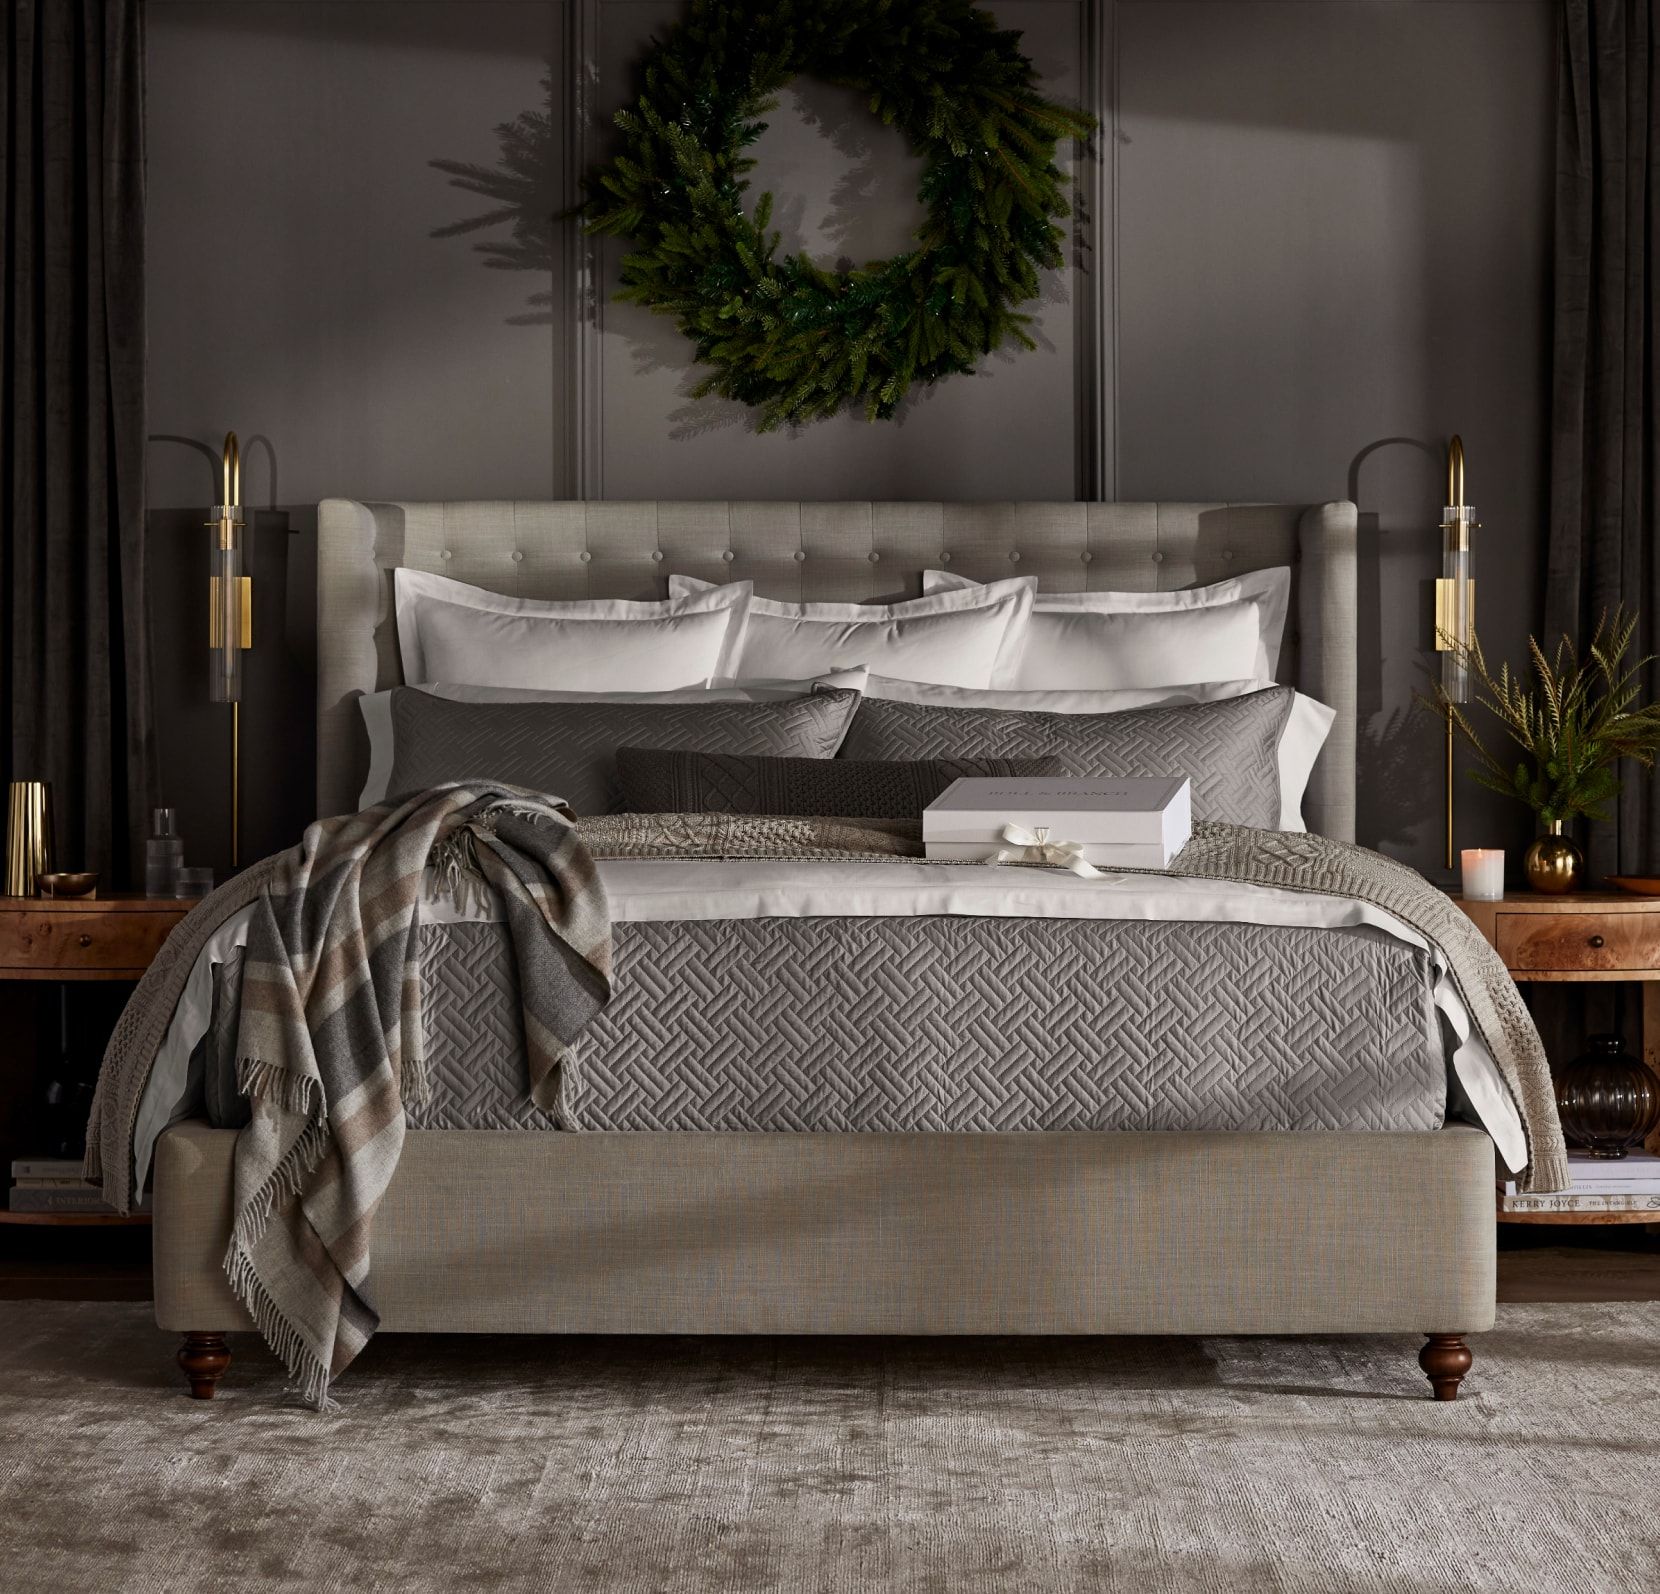 The Mixed Neutrals Bed Bundle | Boll & Branch